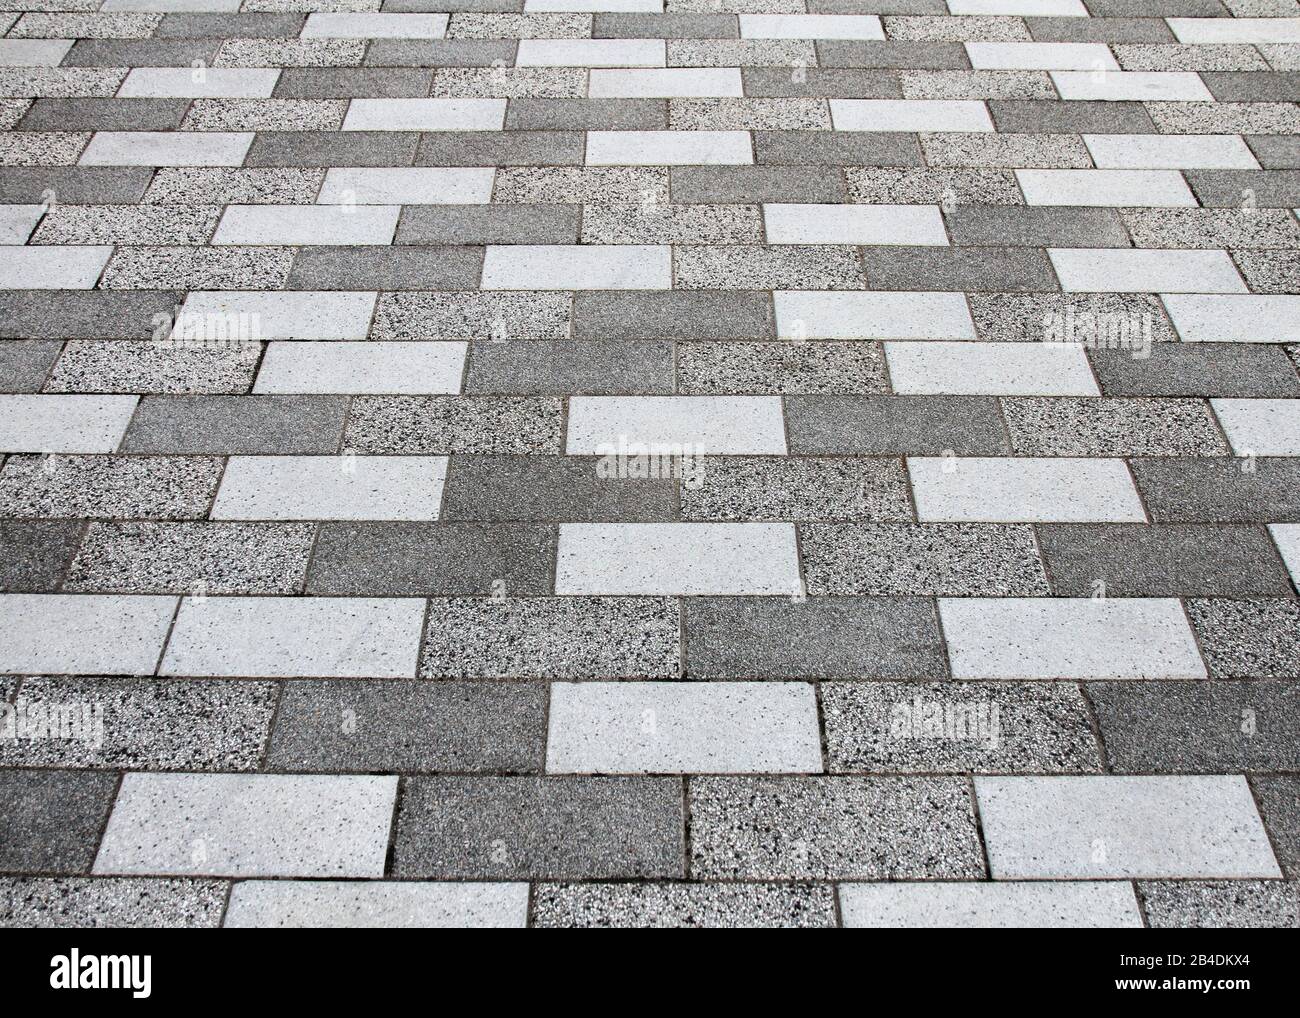 A perspective view of gray and white sidewalk pavement tiles forming an abstract pattern. Stock Photo